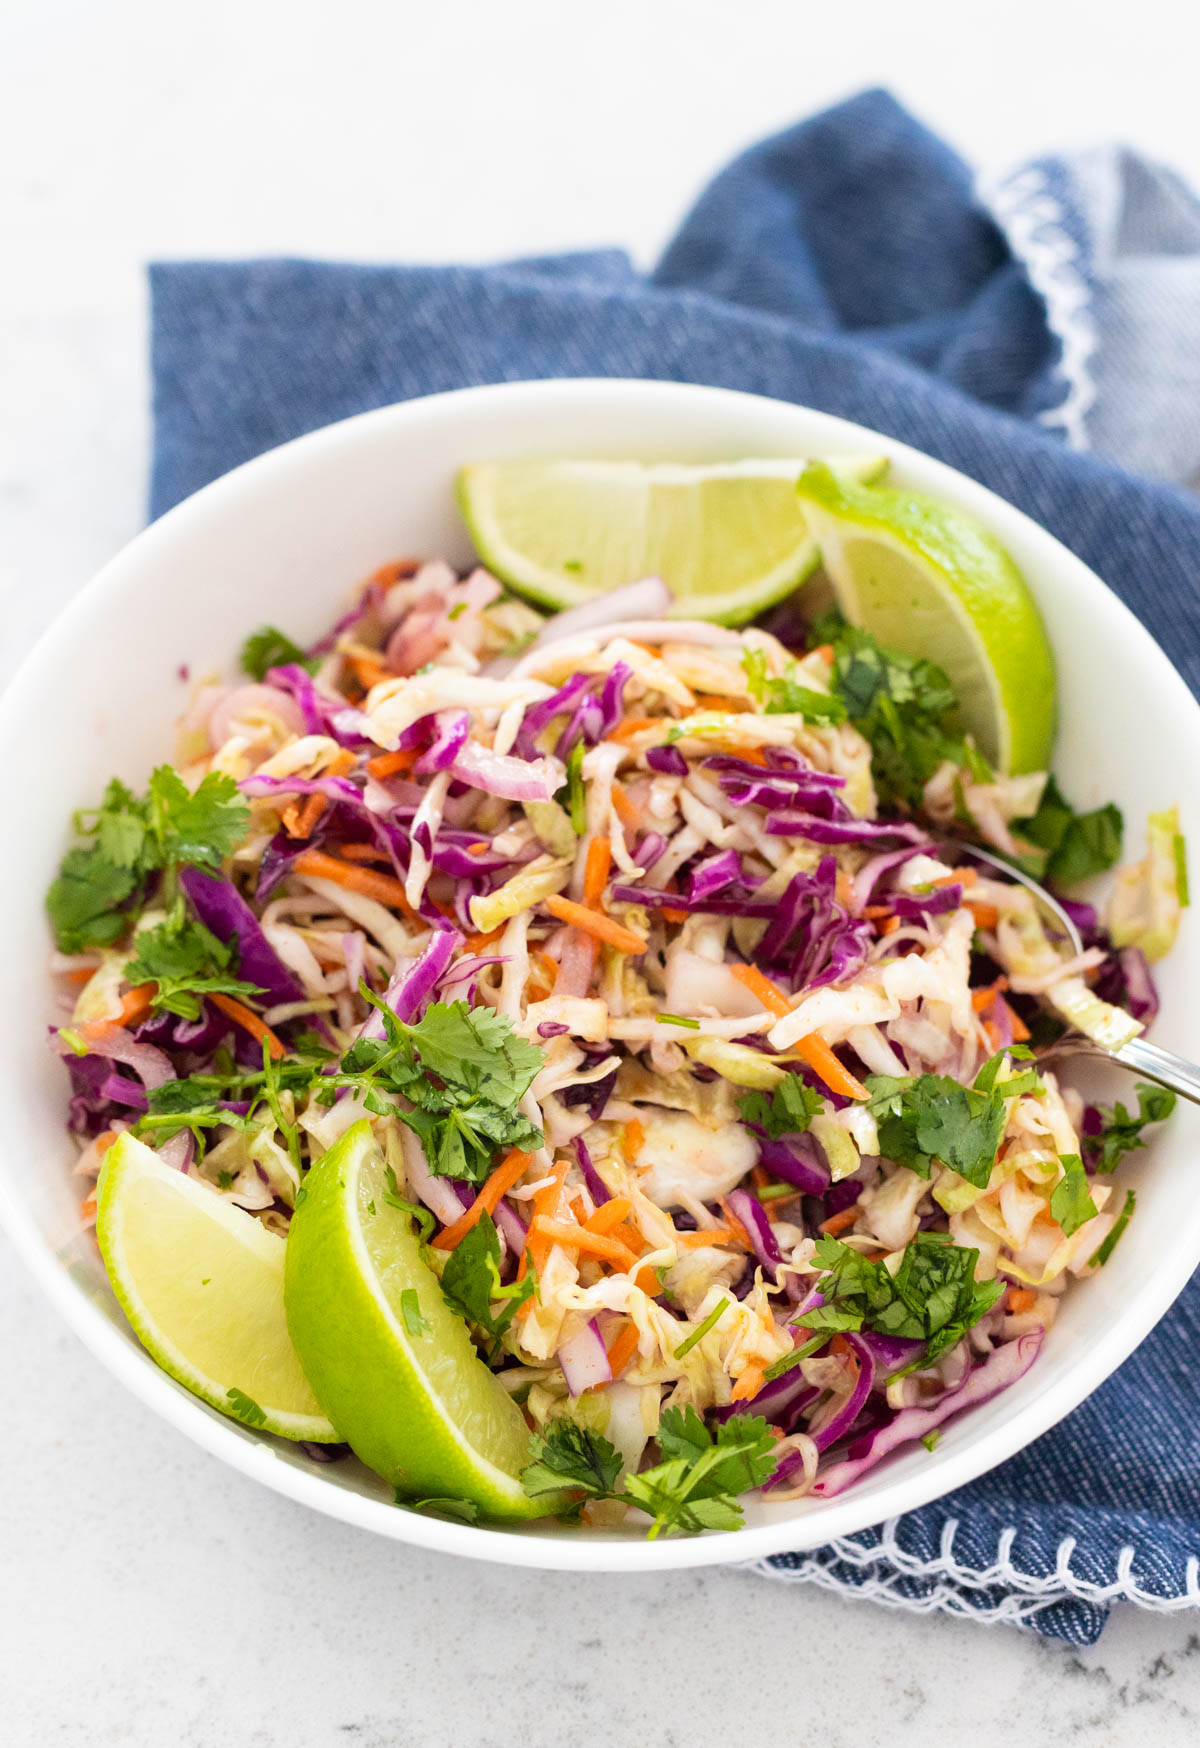 The slaw is in a white bowl with a spoon. Fresh lime wedges are on the side.